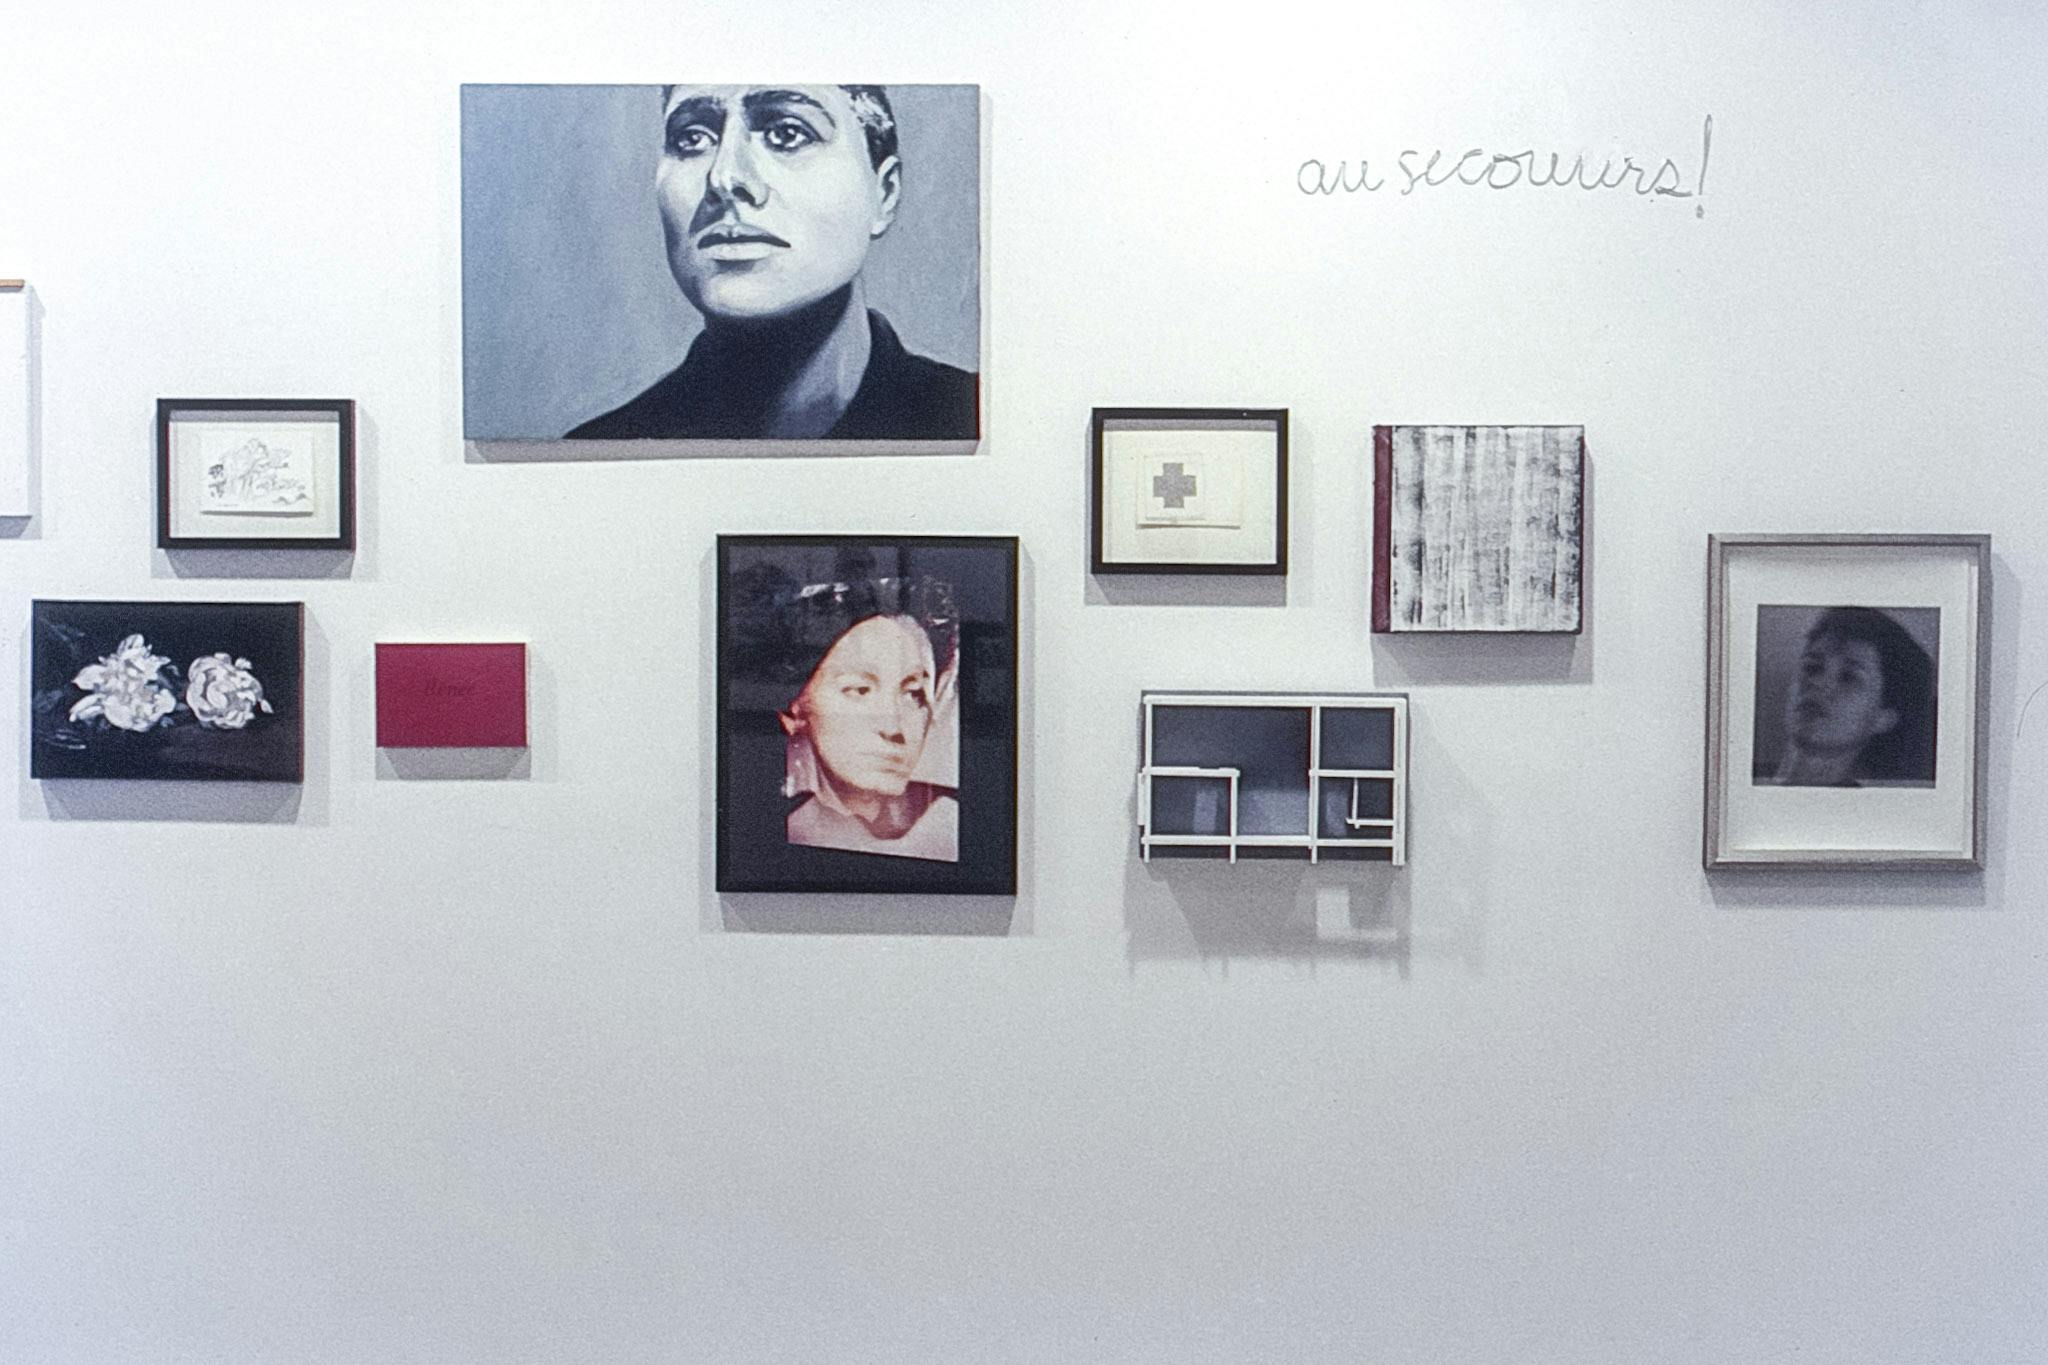 Eleven artworks mounted on a white wall. The works include a small all-red painting, a double exposure photo portrait, and a text work that reads "au secouirs!". Some works are framed, some are not.